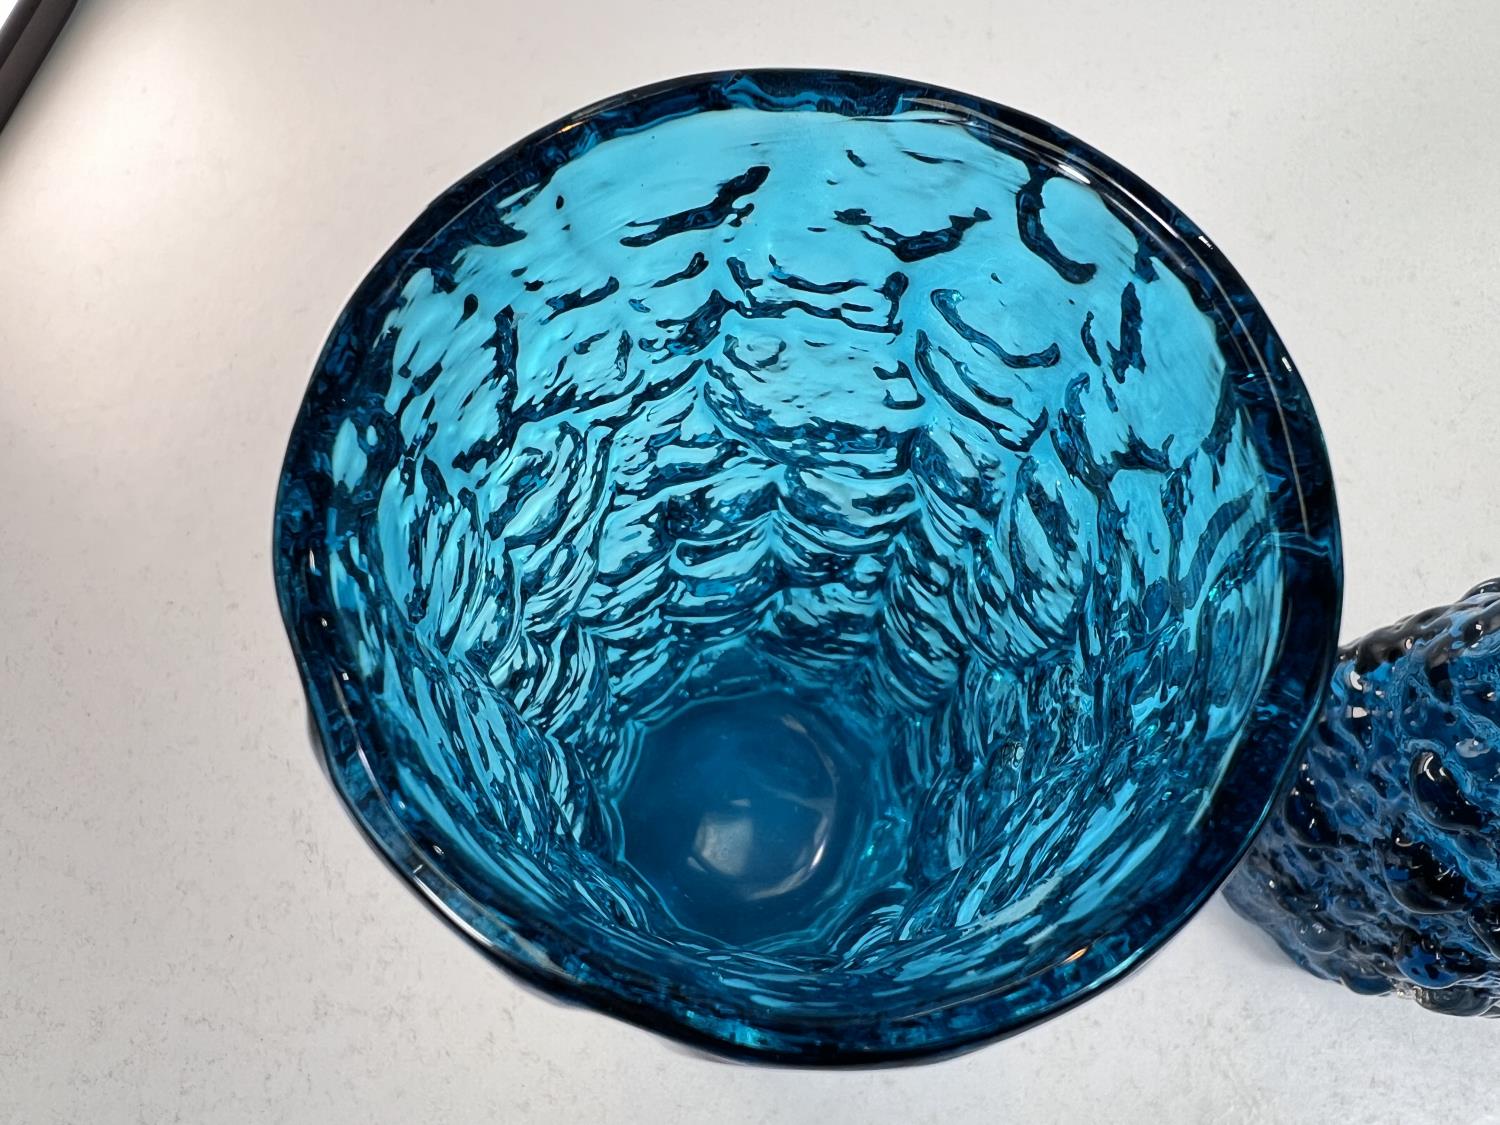 Whitefriars Geoffrey Baxter designed 'Volcano' glass vase in Kingfisher blue pattern 9717, - Image 3 of 4